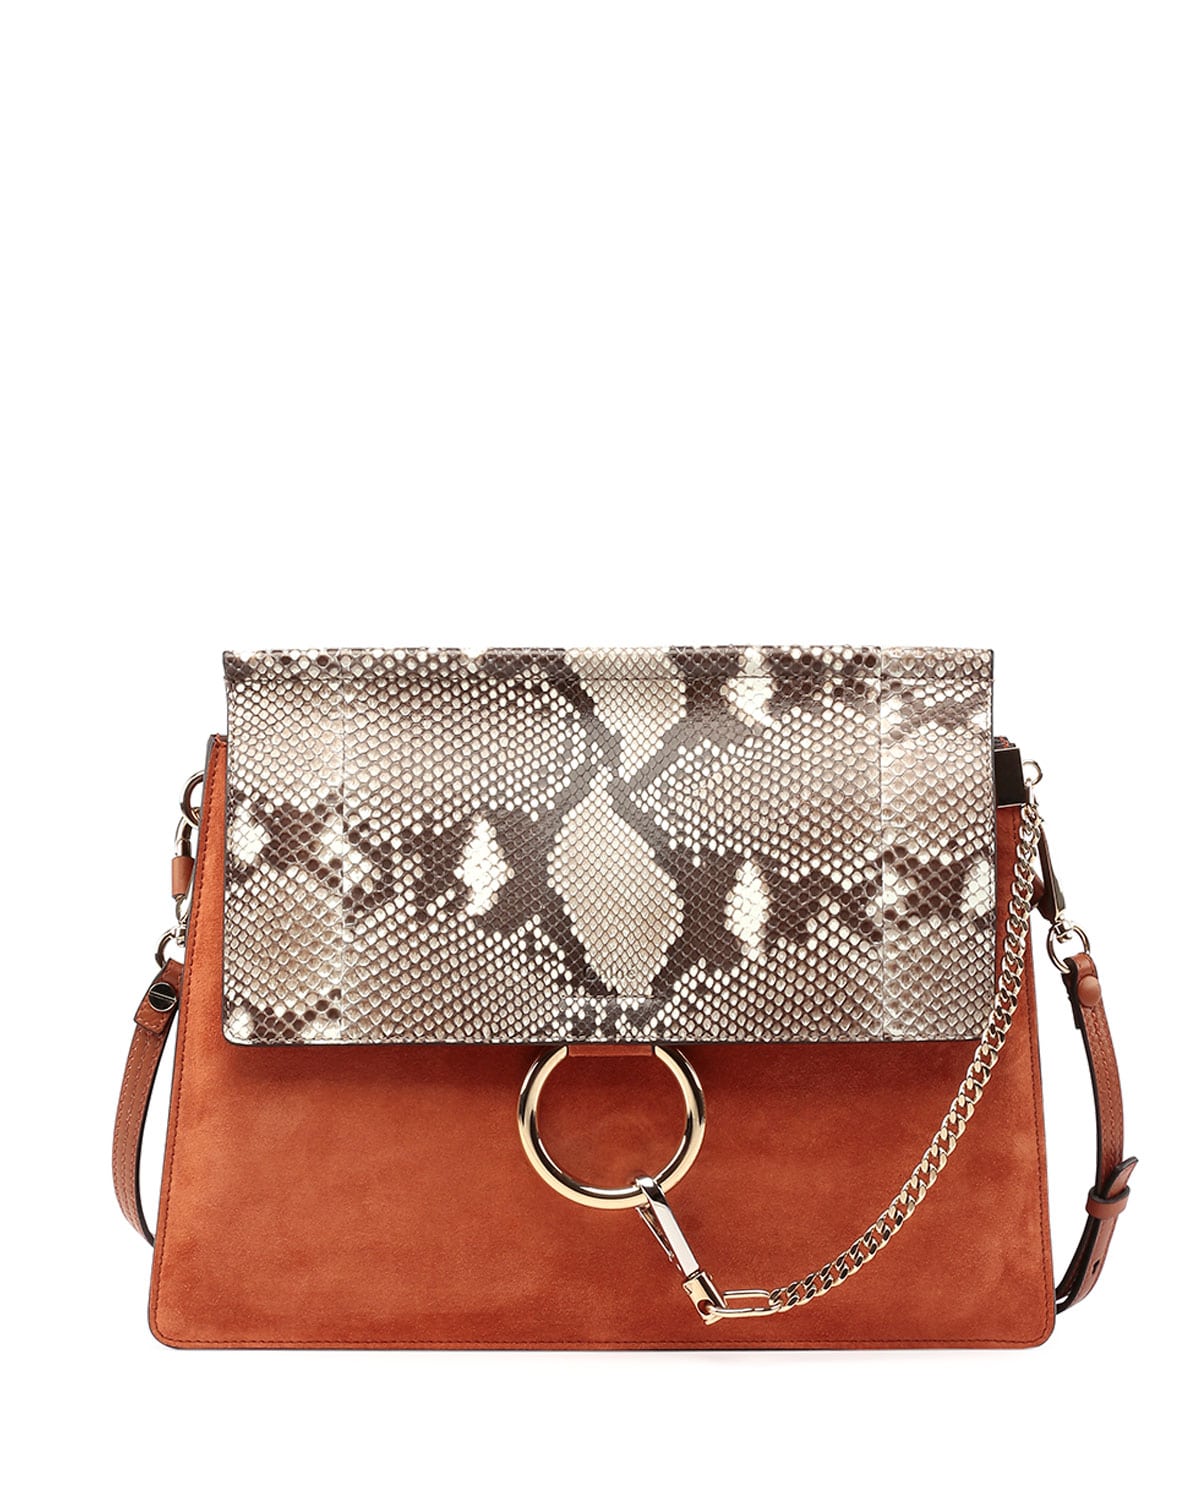 Chloe Spring/Summer 2016 Bag Collection - Spotted Fashion